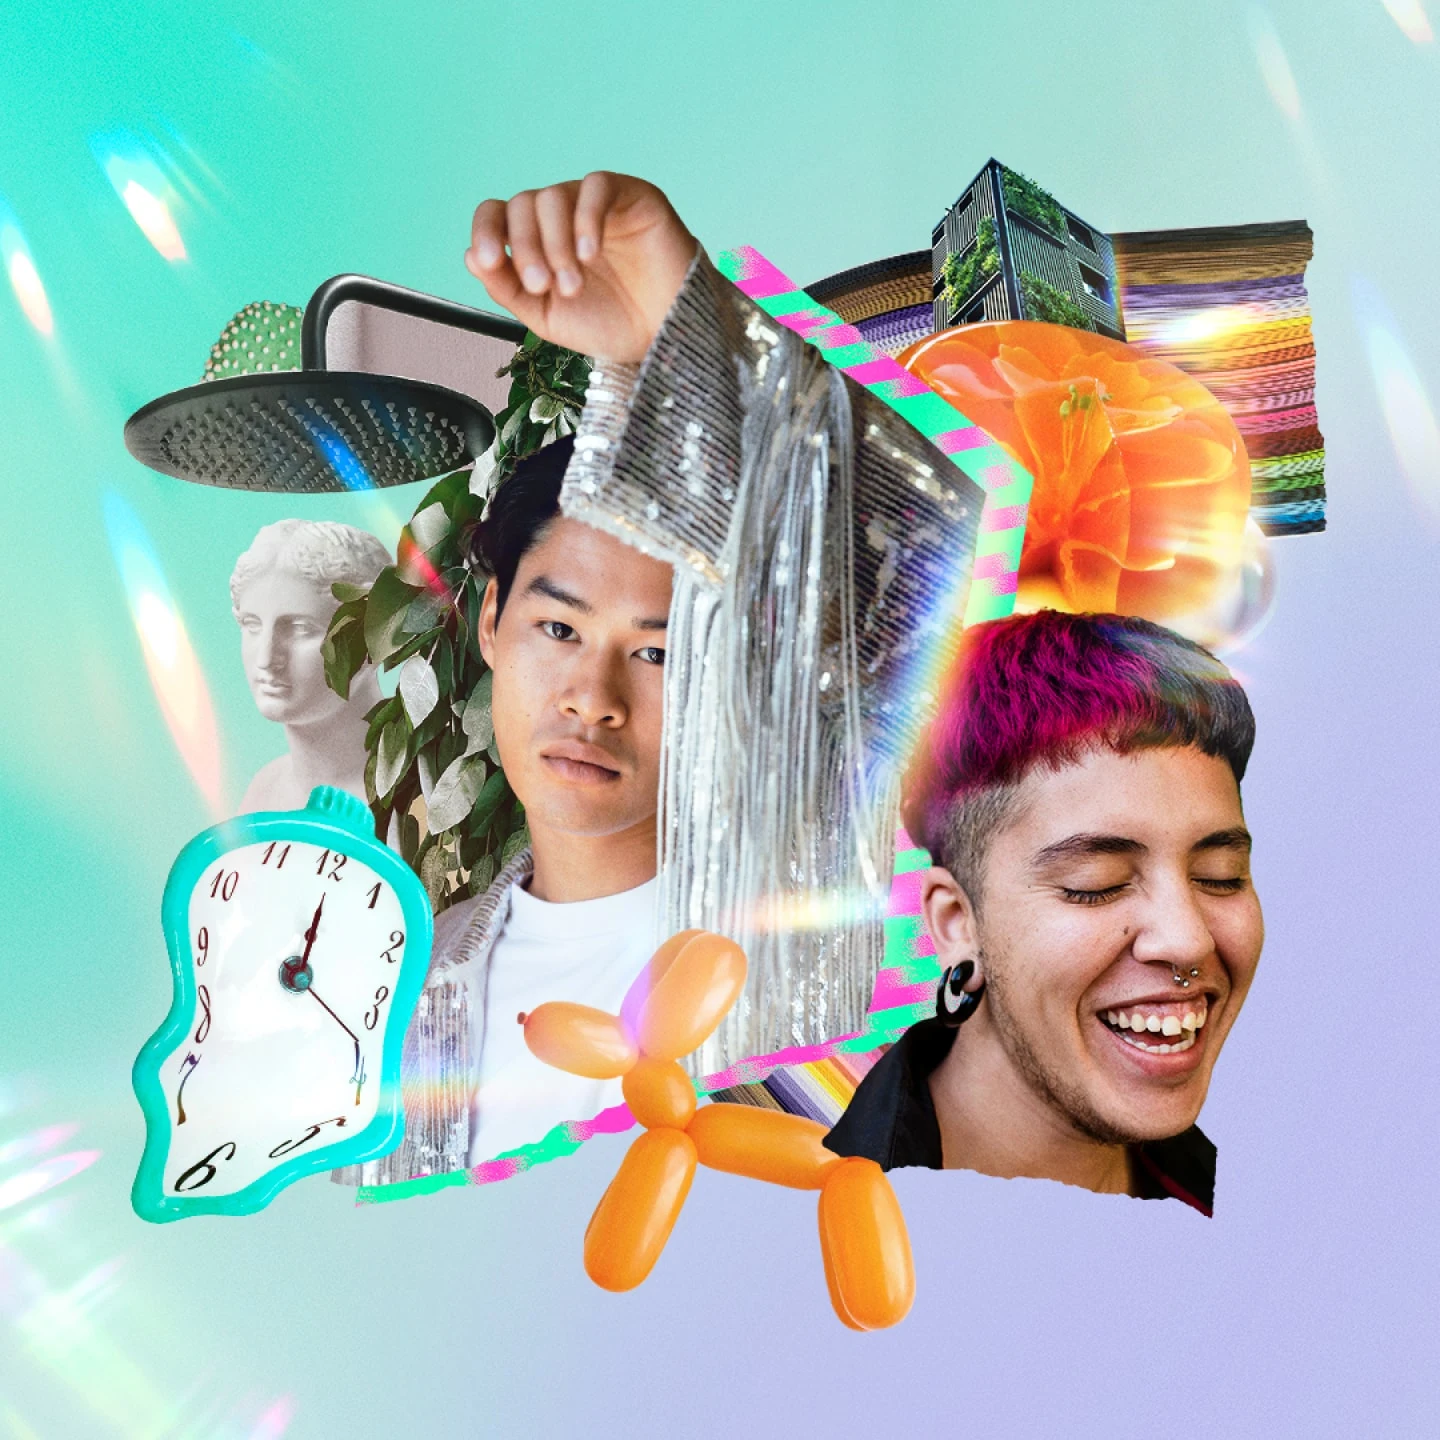 Collage featuring one person with dual-toned hair and another person wearing a shiny, fringe jacket surrounded by a random assortment of graphics that will be used throughout the trends report.